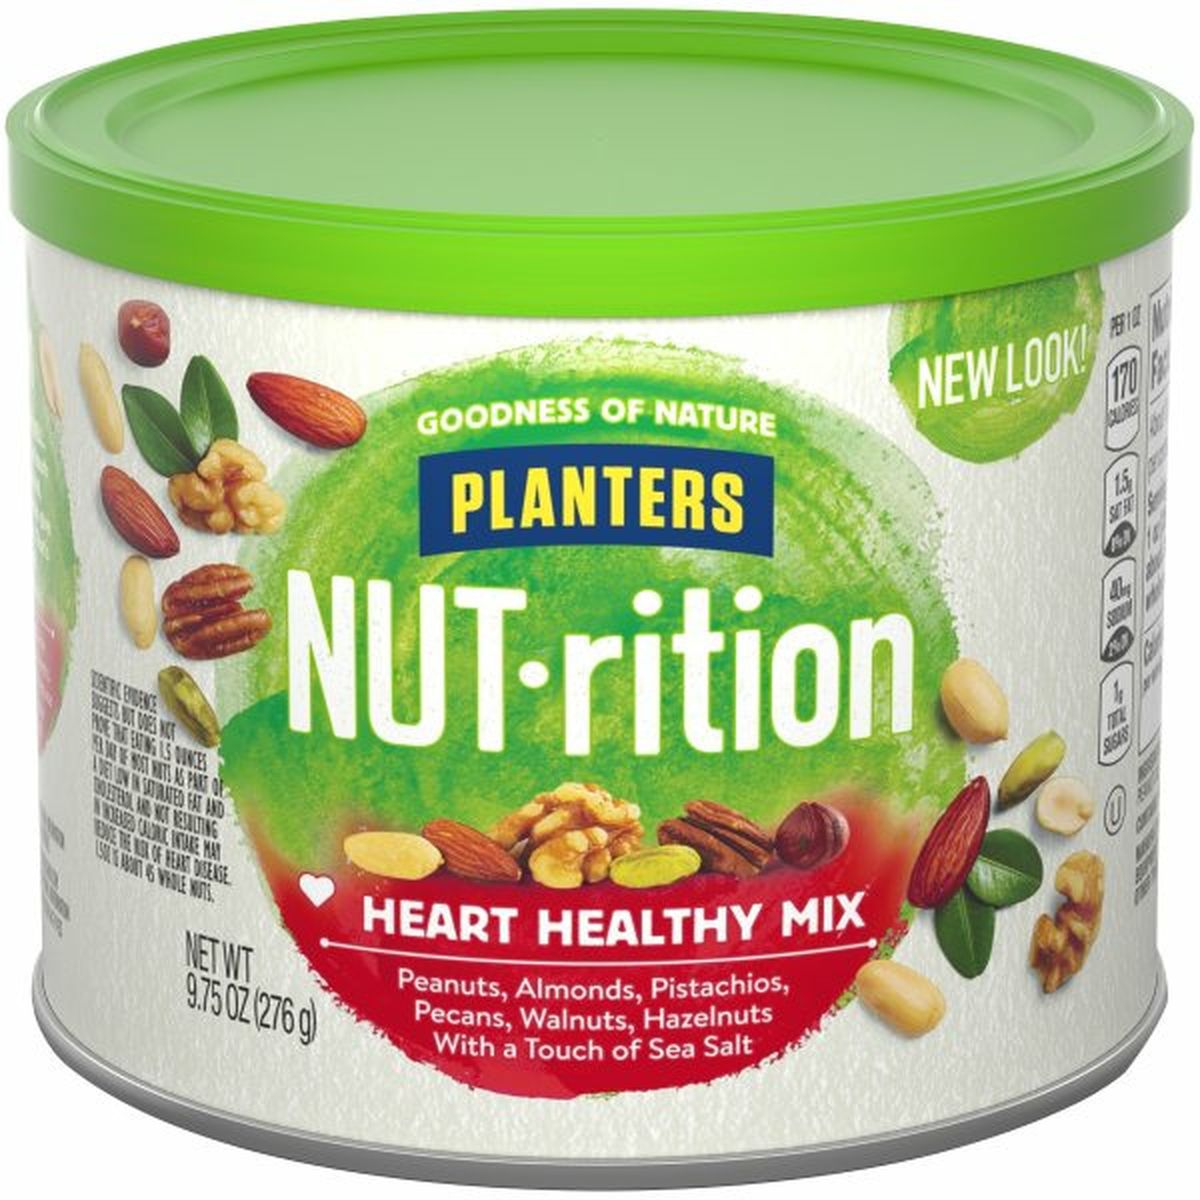 Calories in Planters Nut-rition NUT-rition Heart Healthy Mix